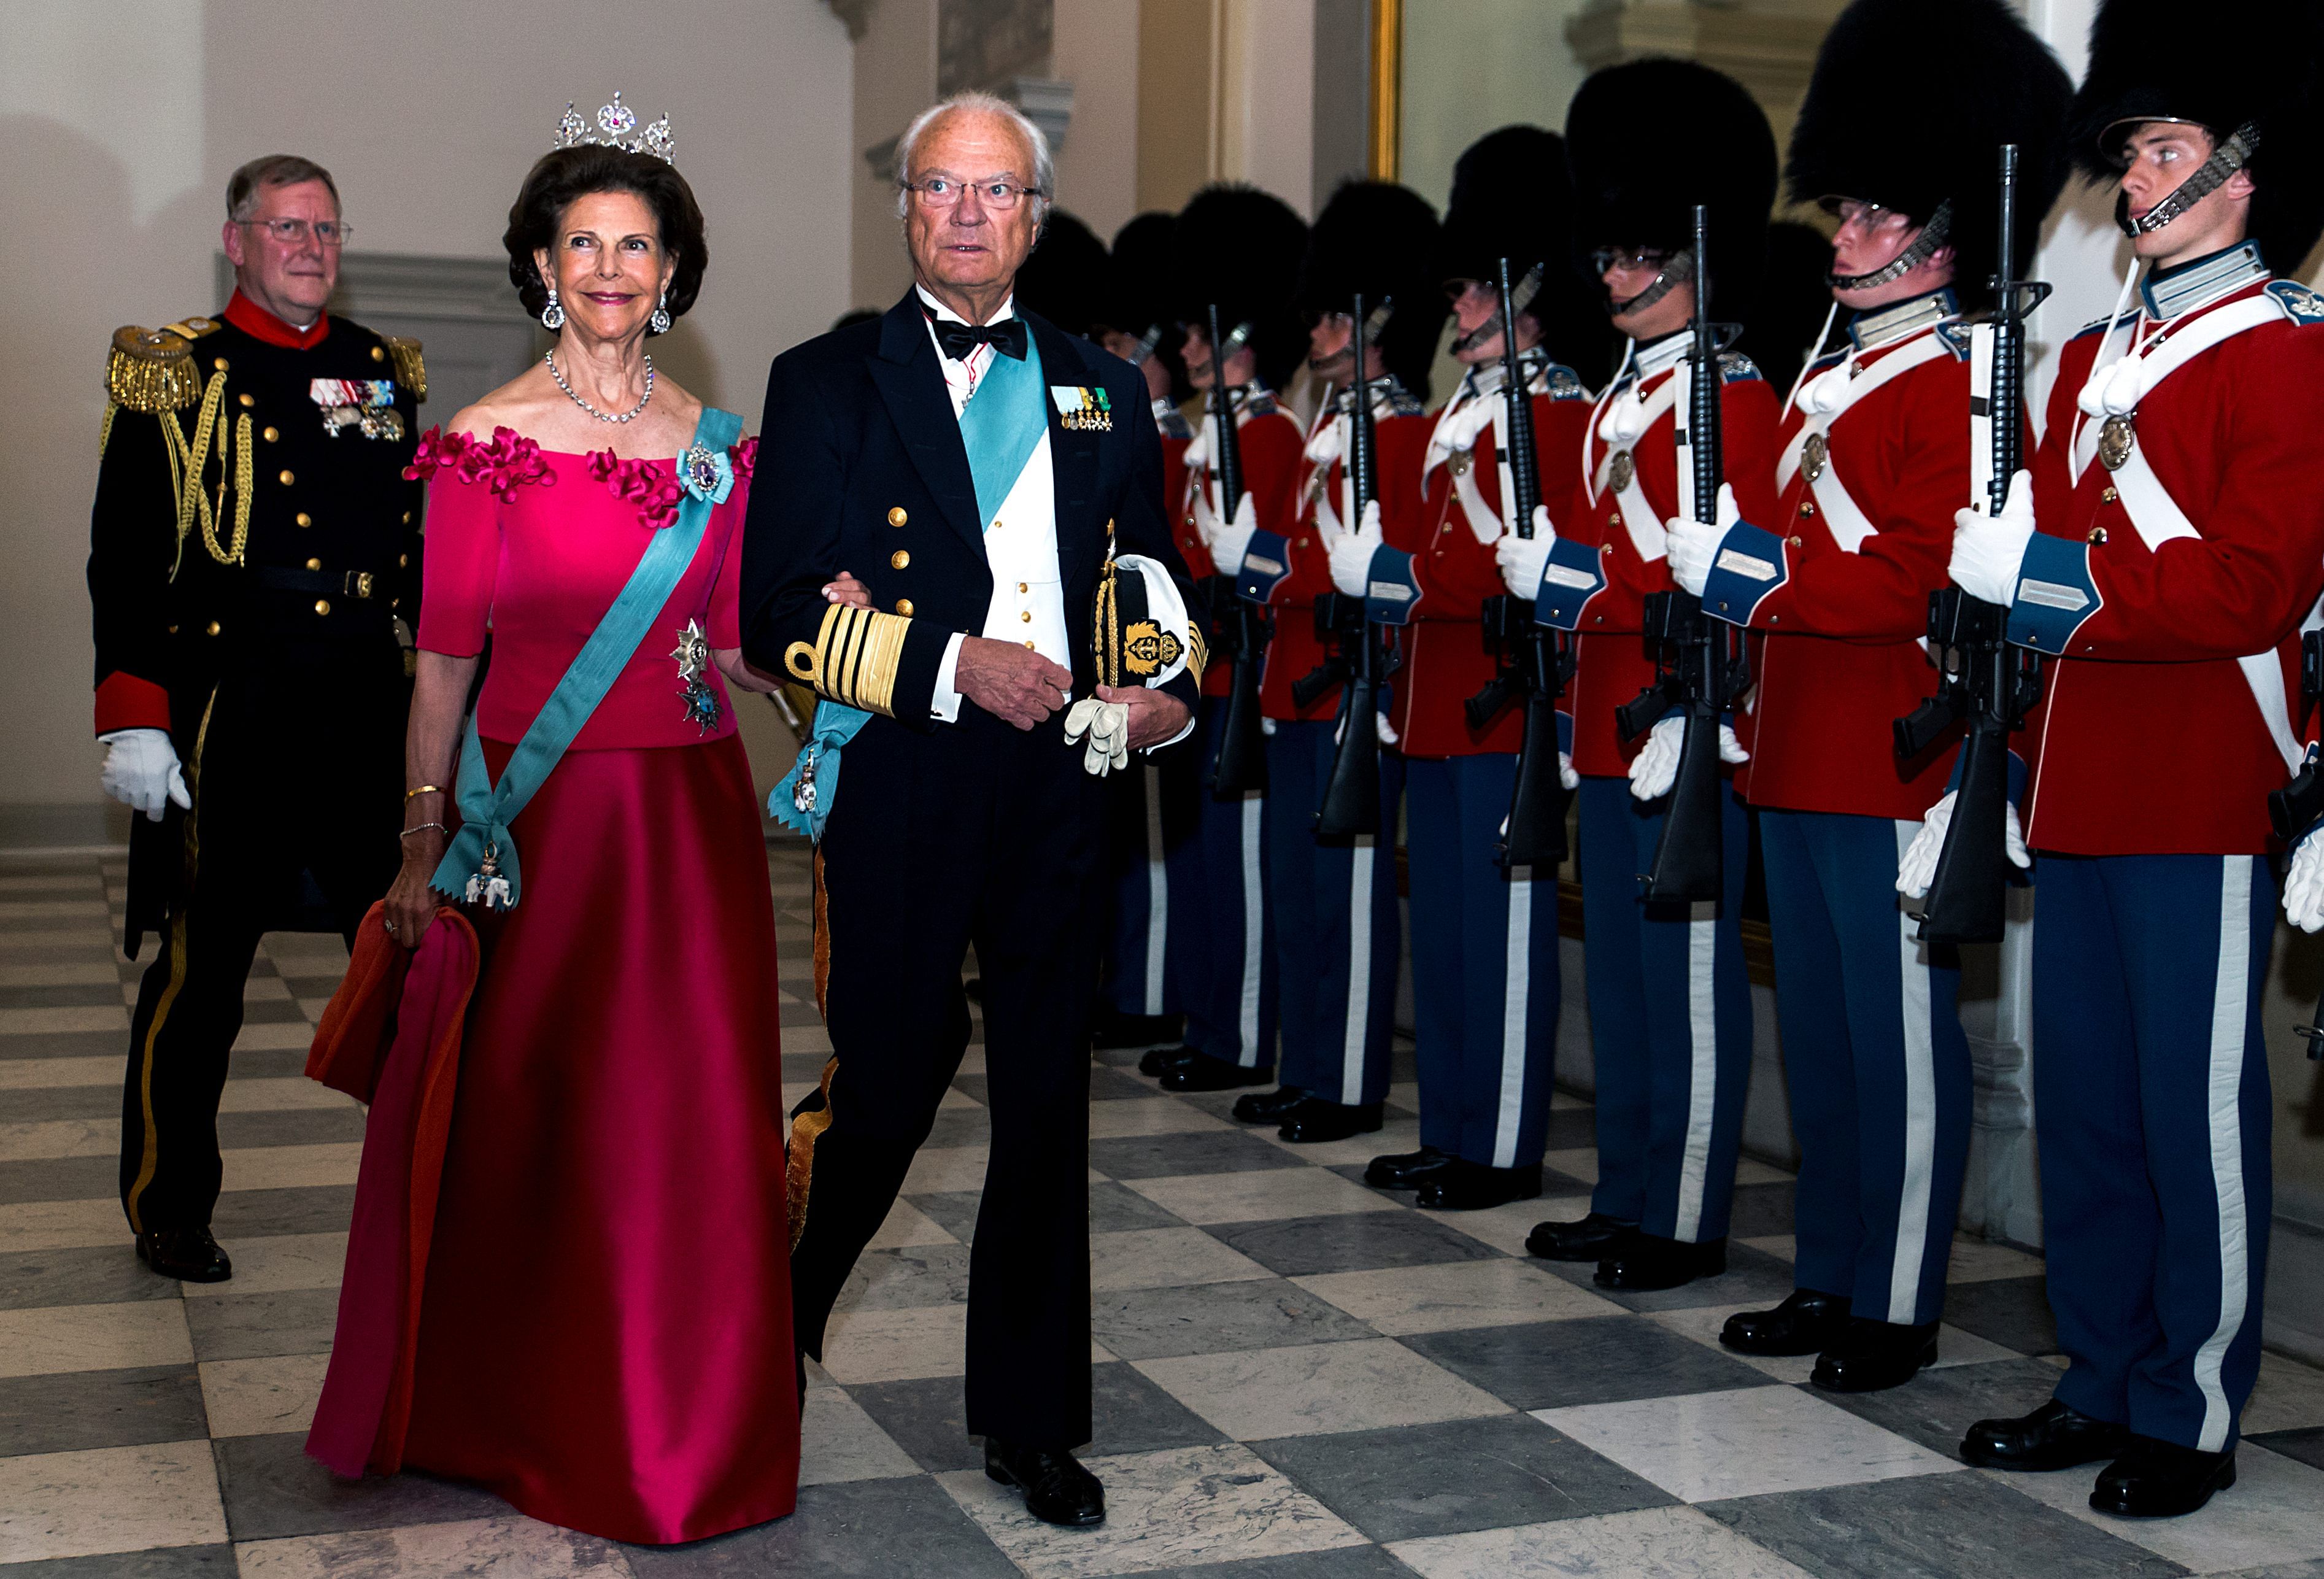 King Carl Gustaf of Sweden and wife Queen Silvia arrive to the gala banquet on the occasion of The Crown Prince's 50th birthday at Christiansborg Palace on May 26, 2018 in Copenhagen, Denmark. Some 350 guest participated in the event (Photo by Ole Jensen/Getty Images)